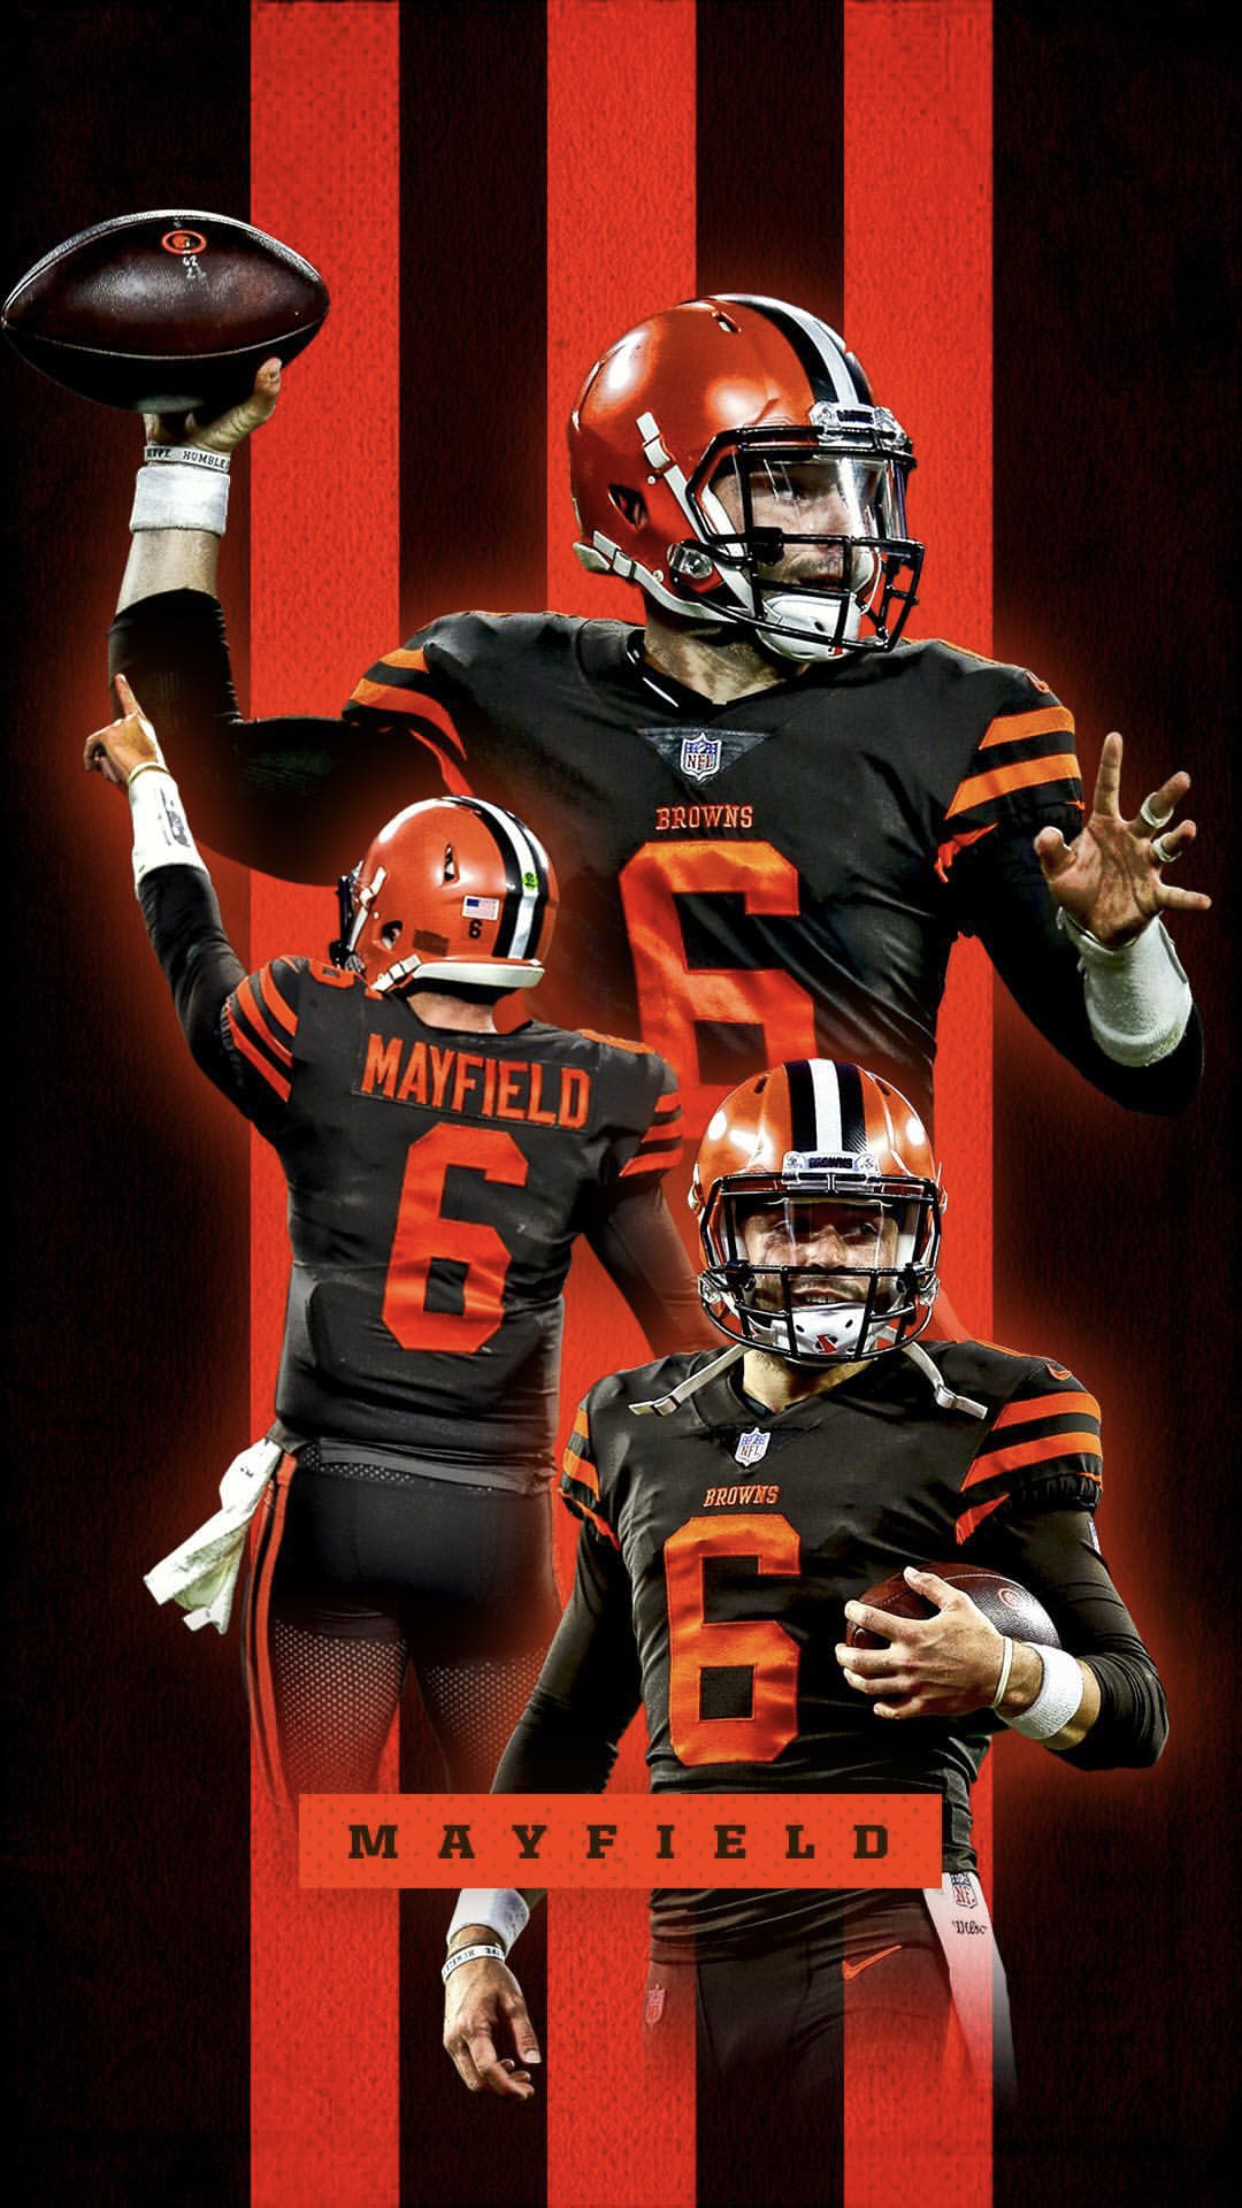 Free Download Baker Mayfield Wallpaper Browns 1242x2208 For Your Images, Photos, Reviews